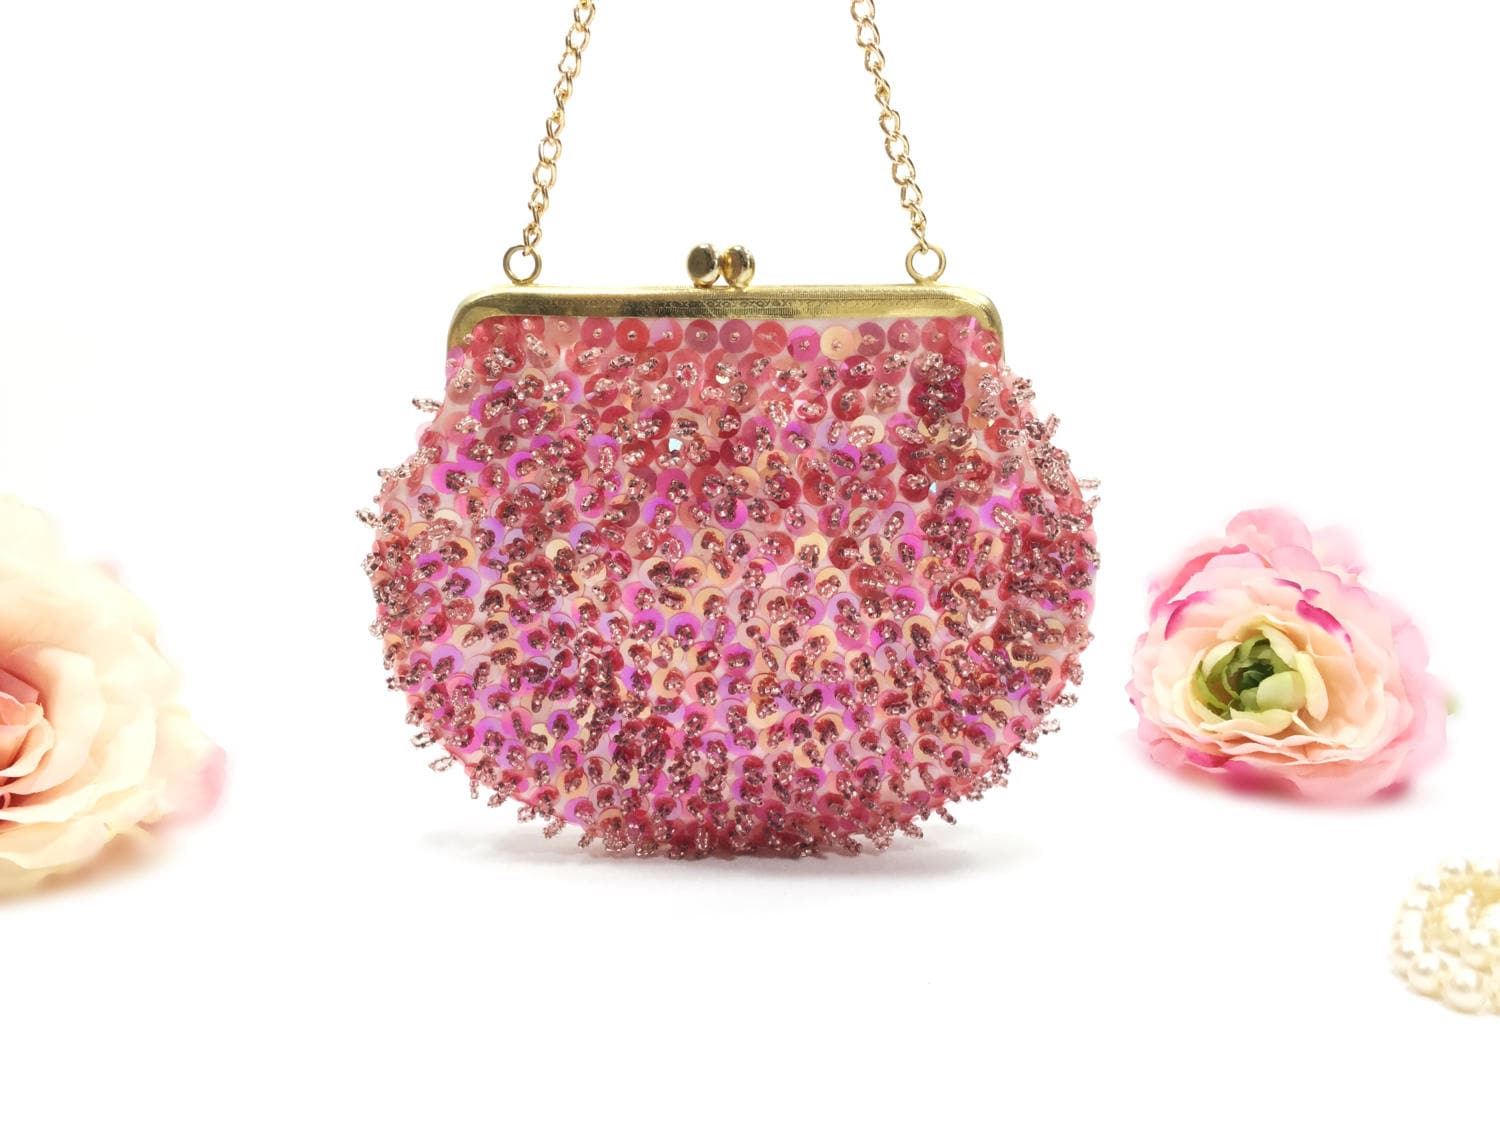 Vintage Pink Sequence Beaded Evening Bag, Pink Beaded Hand Bag, Pink ...